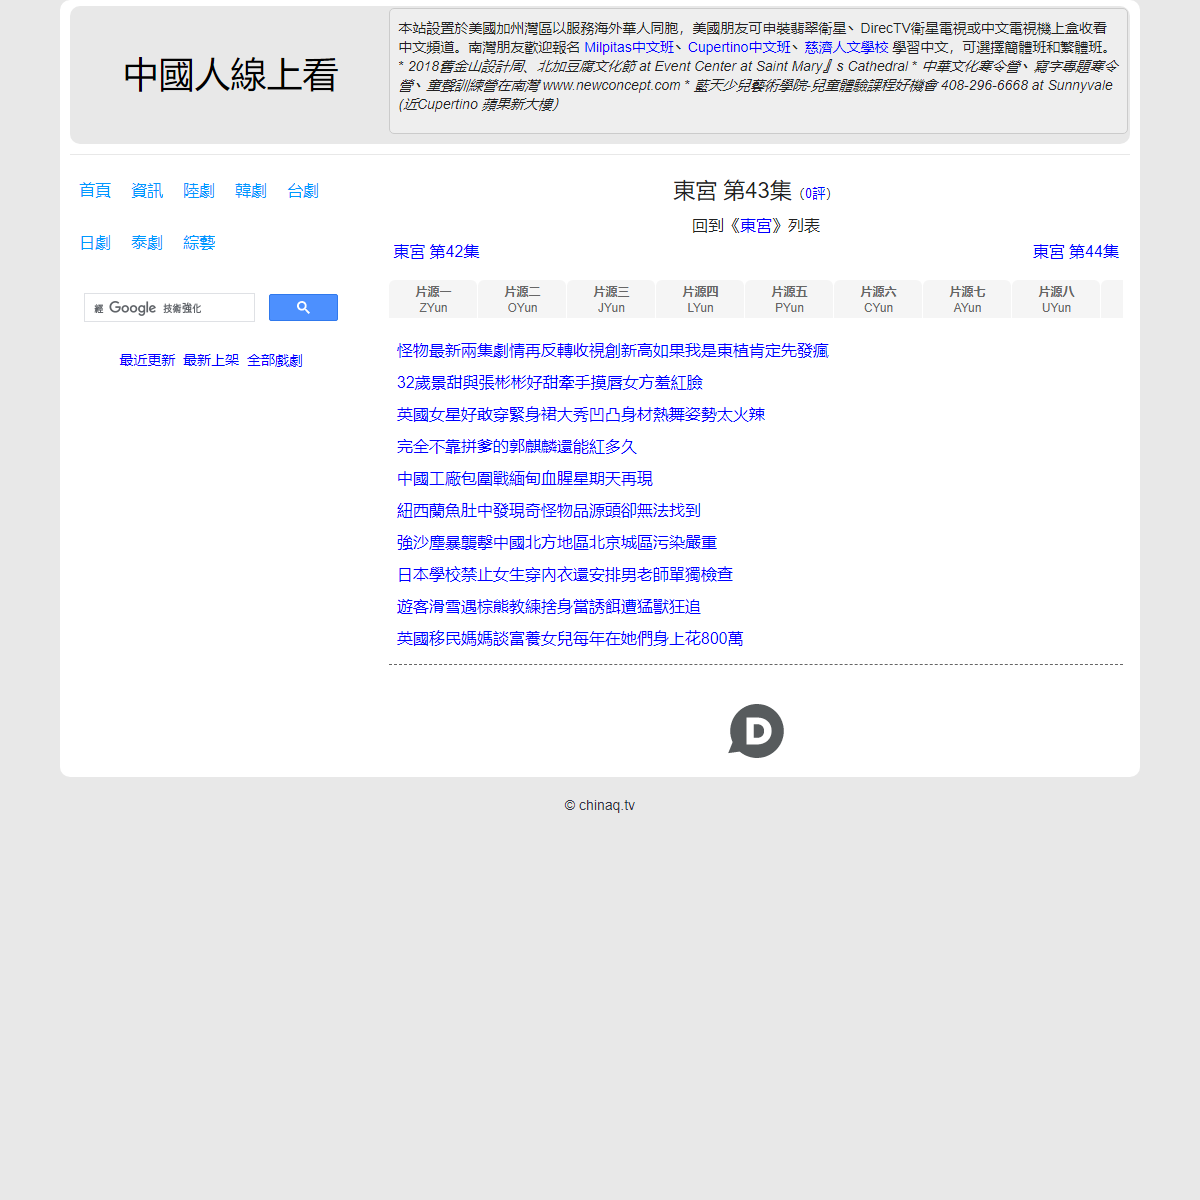 A complete backup of https://chinaq.tv/cn190214b/43.html